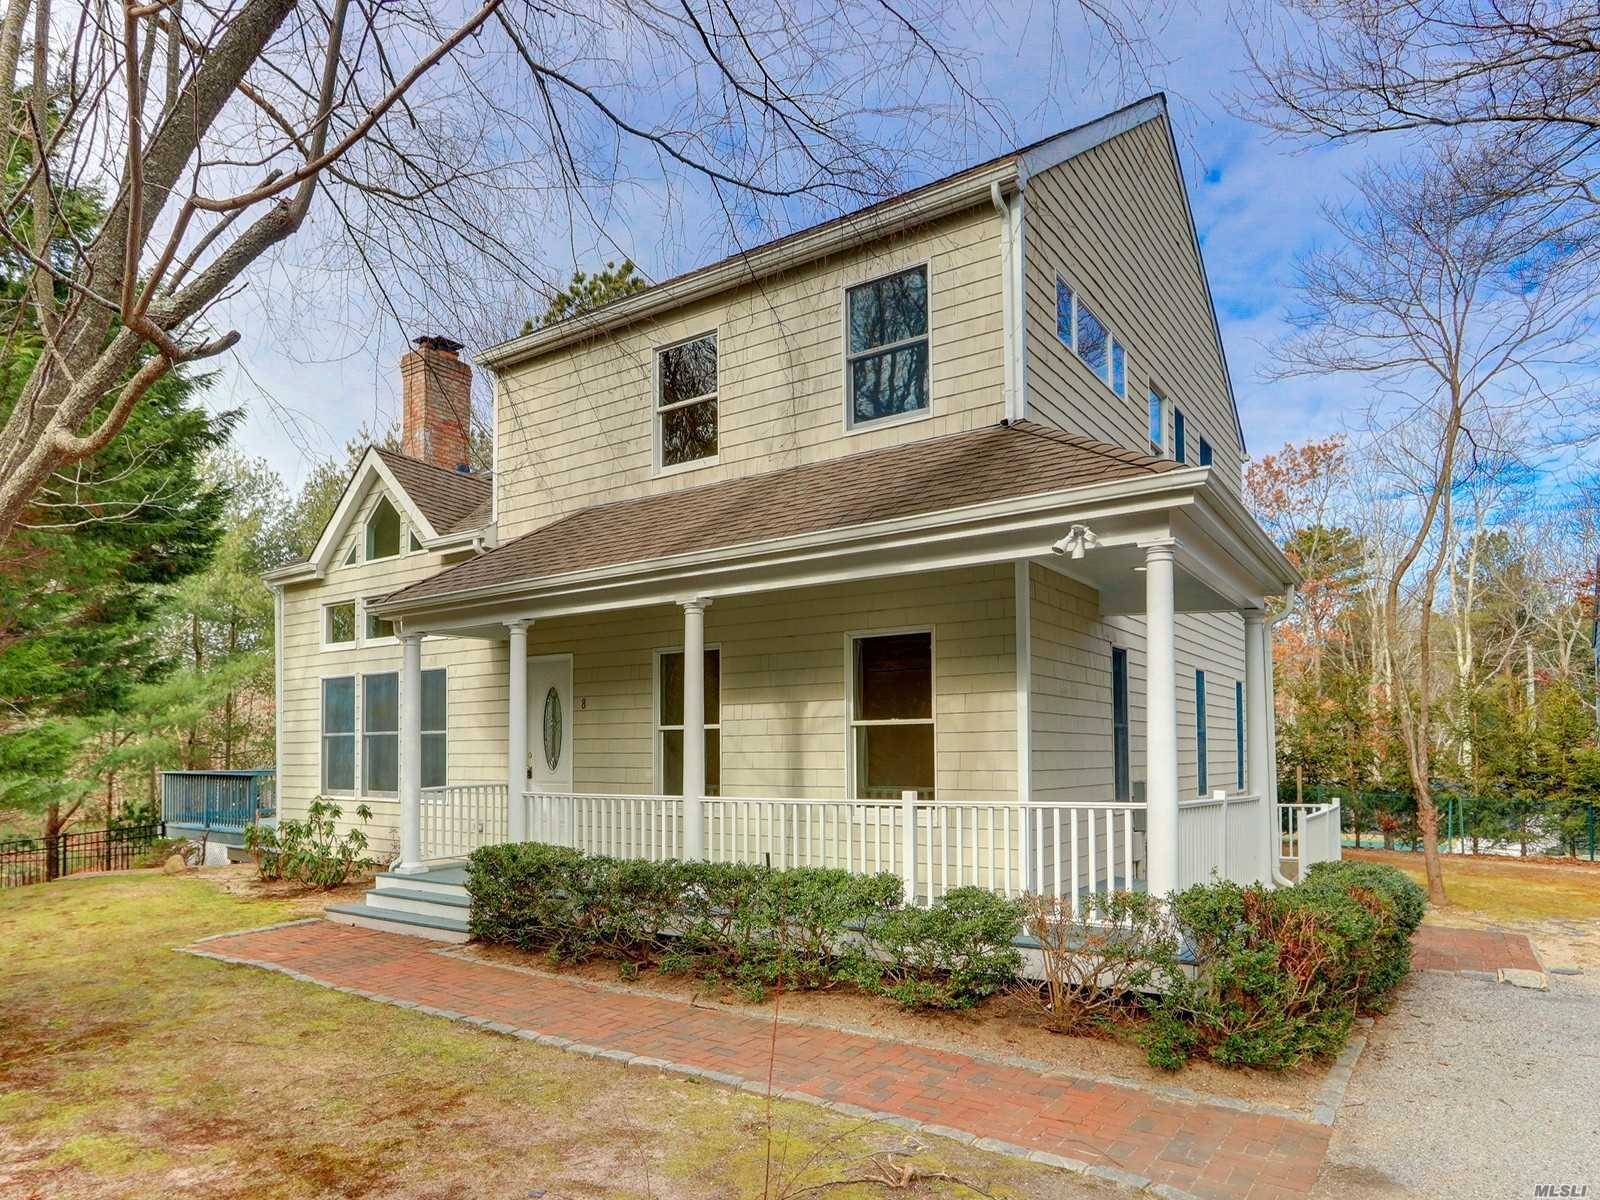 Move Right In To This Renovated Traditional Style Home W 5 Bedrooms, 3.